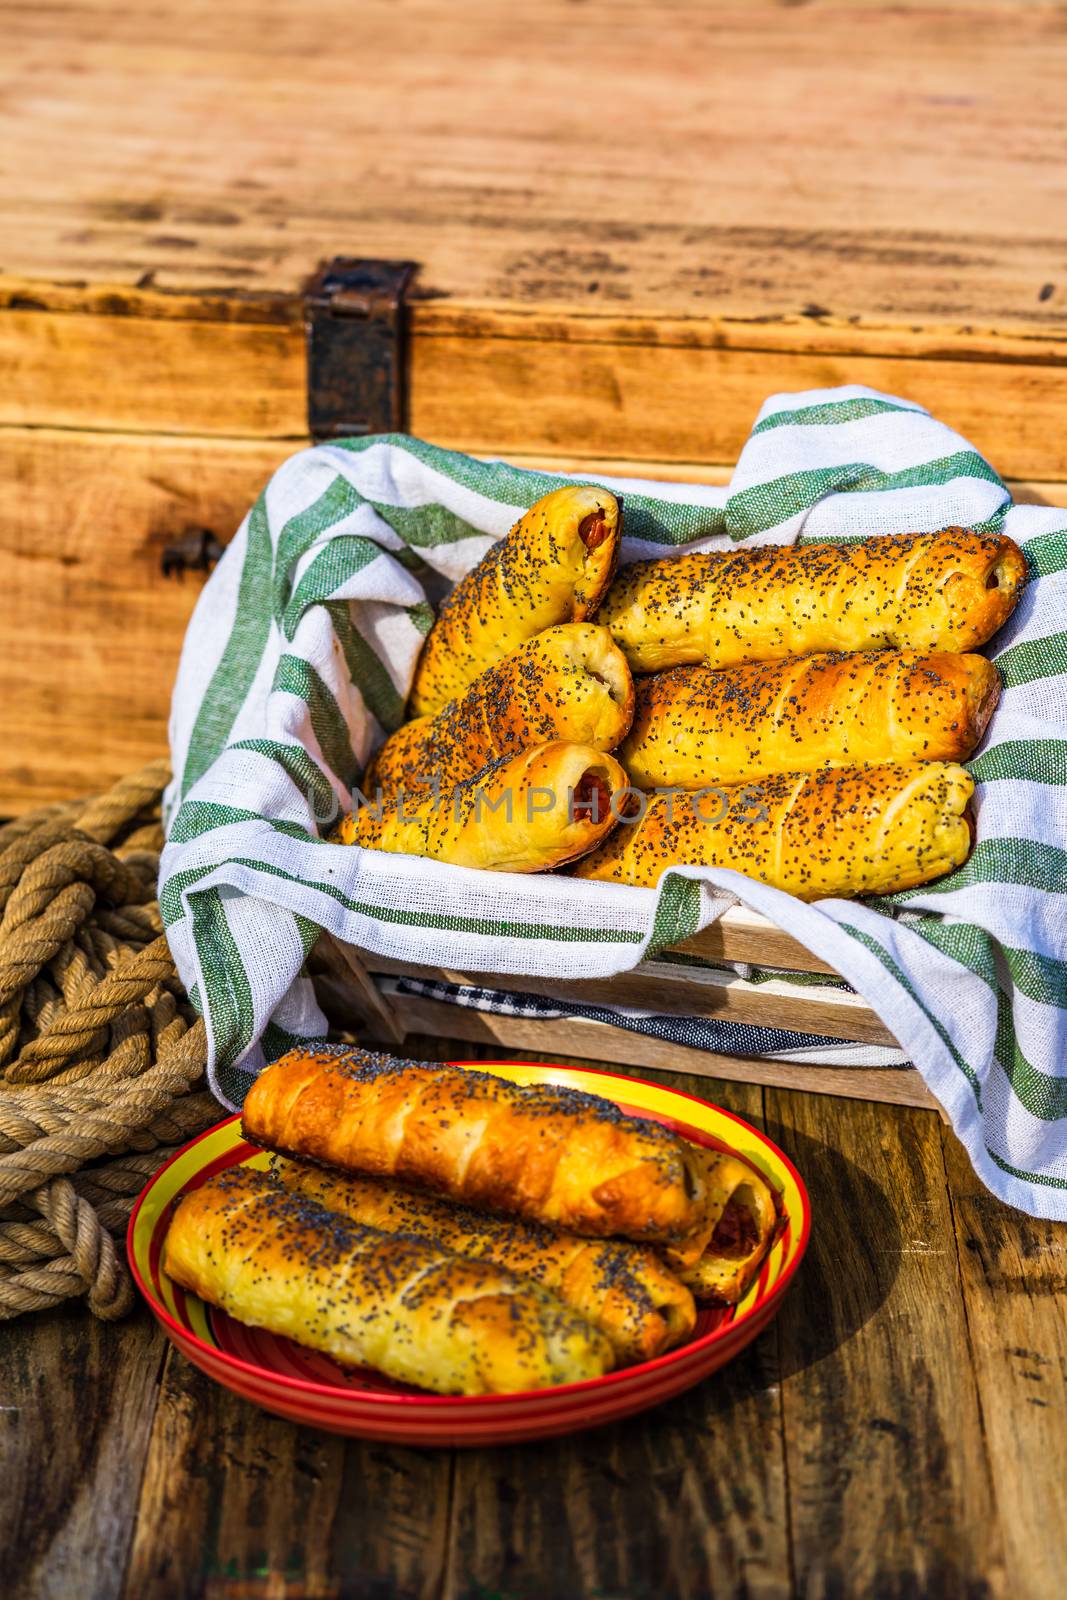 Sausages baked in dough sprinkled with salt and poppy seeds in a by vladispas